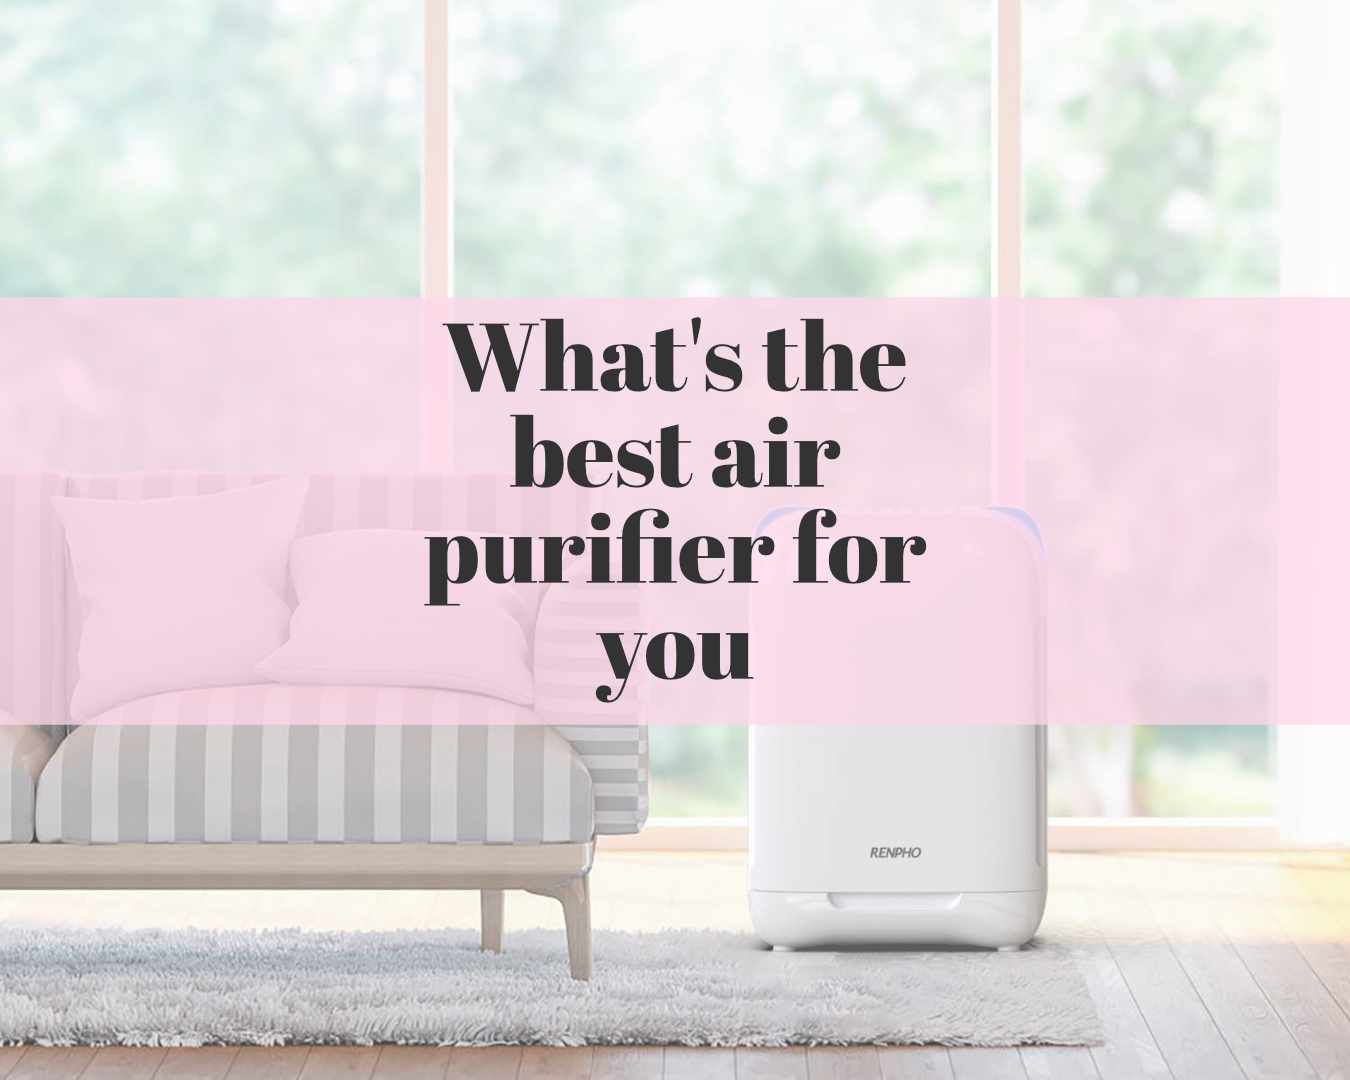 What's the best air purifier for you